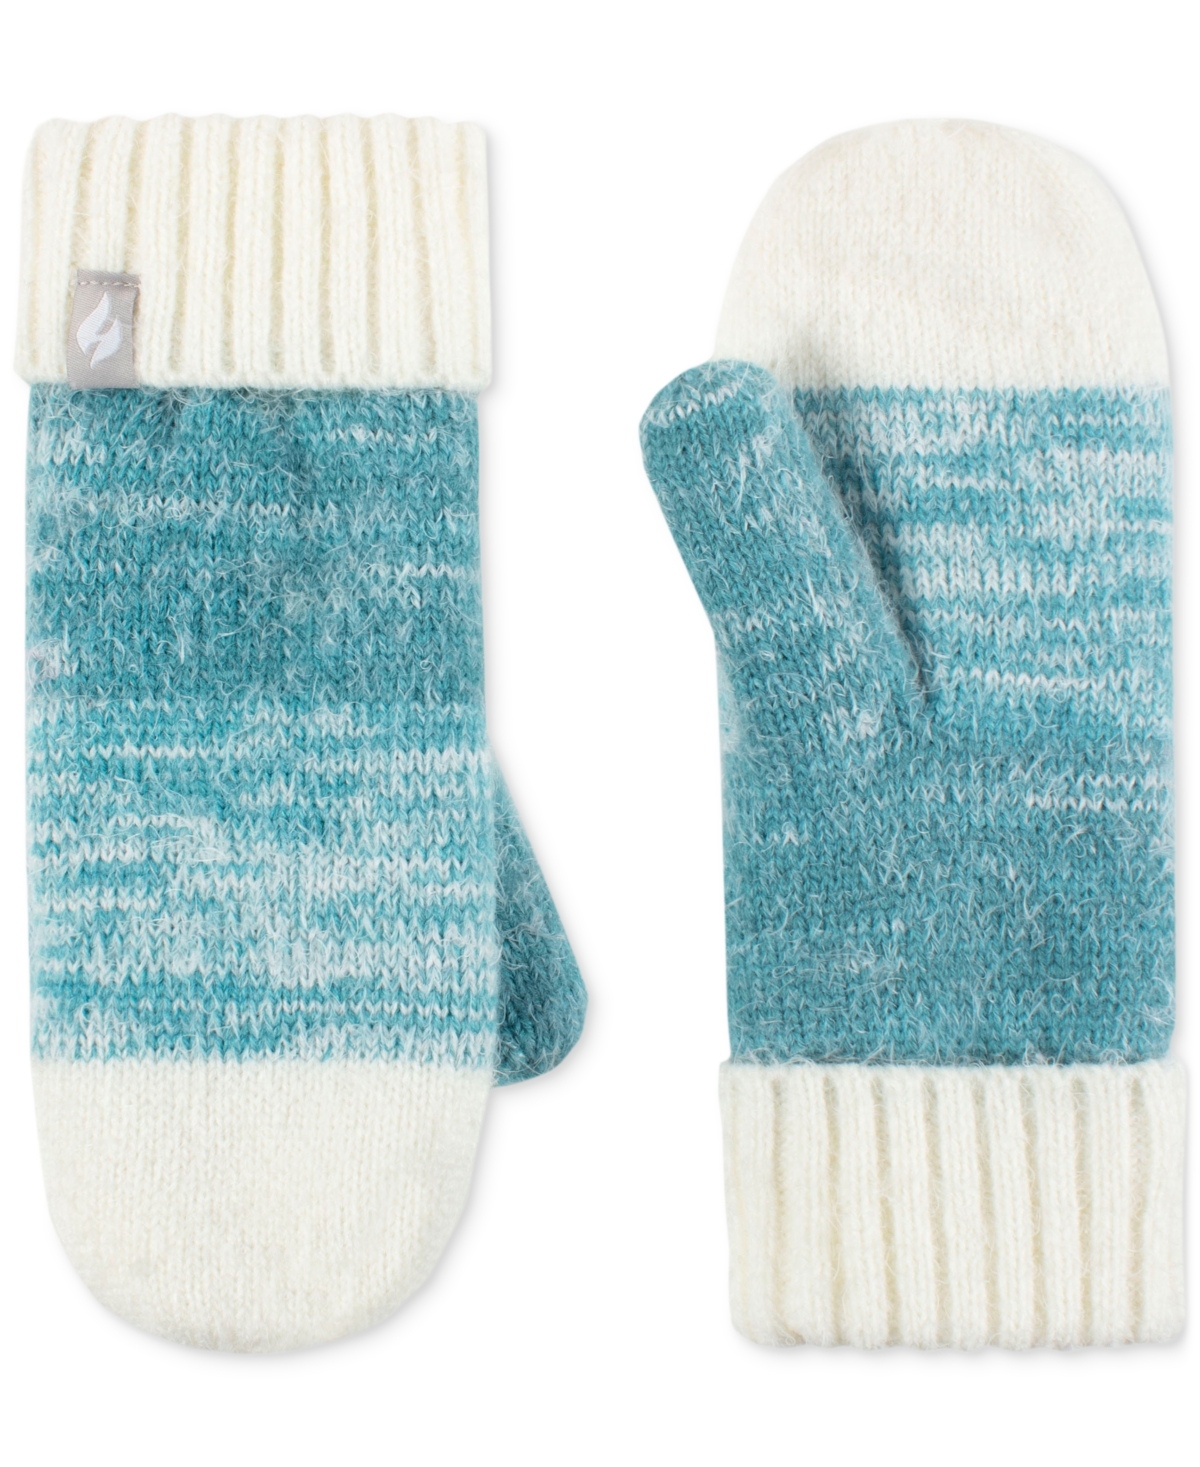 Heat Holders Sloane Feather Knit Mittens In Teal